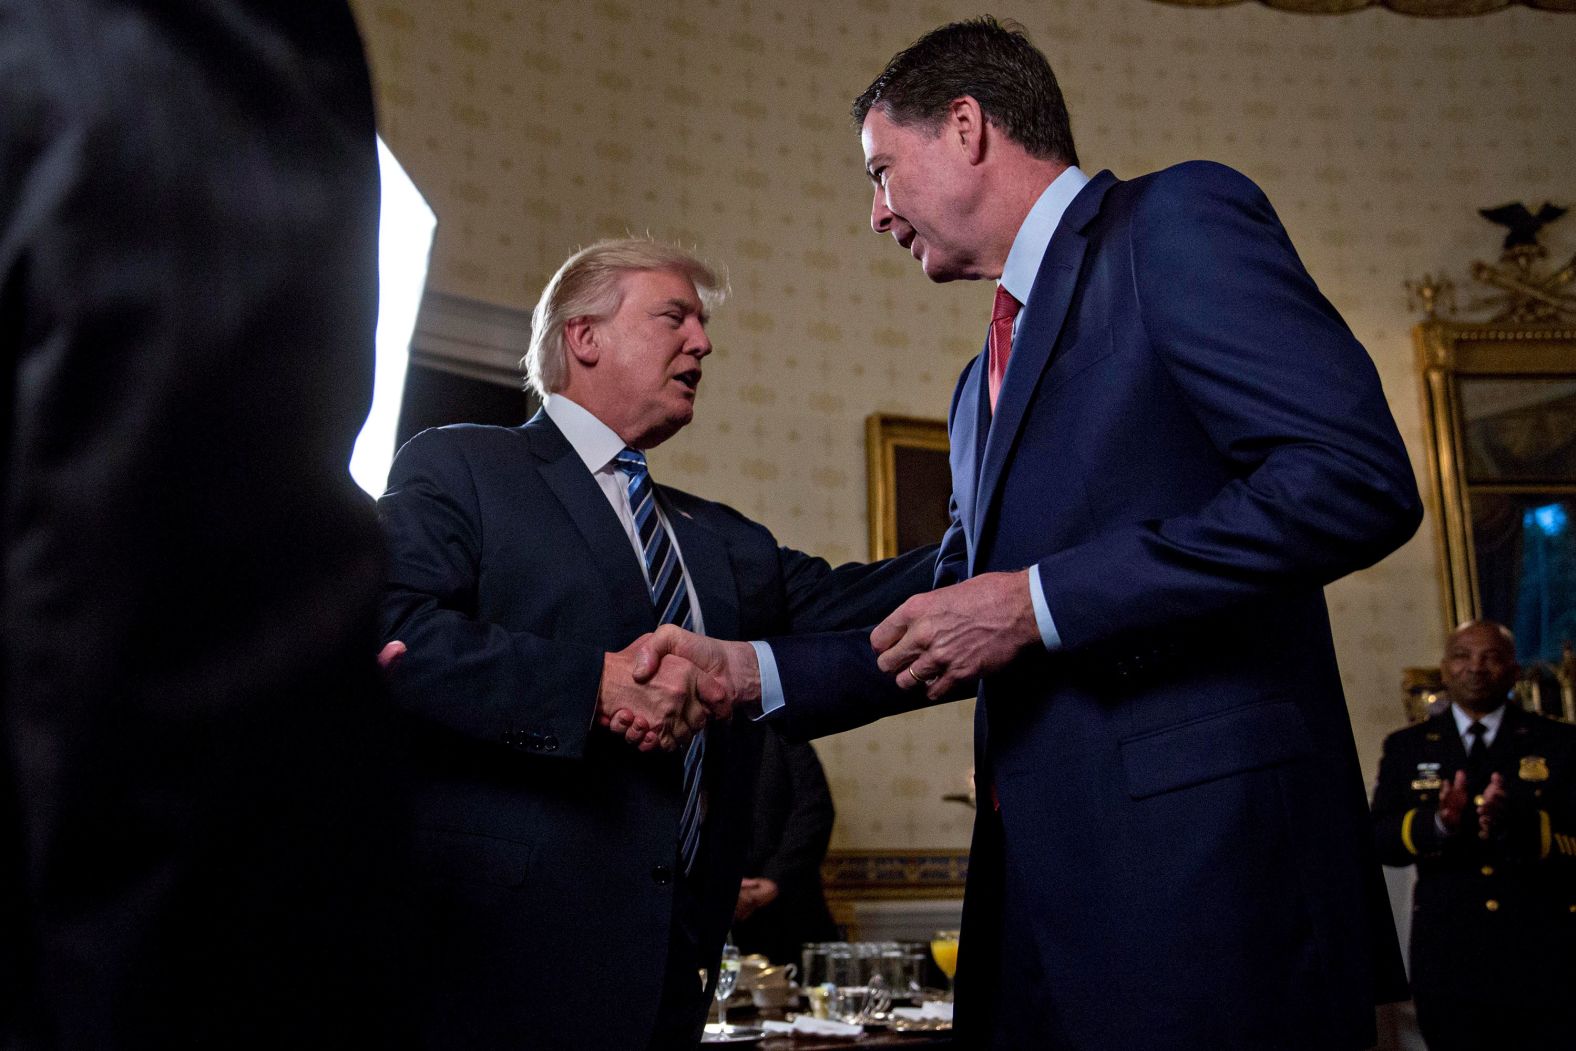 Trump shakes hands with FBI Director James Comey during a White House reception in January 2017. <a href="index.php?page=&url=http%3A%2F%2Fwww.cnn.com%2F2017%2F05%2F09%2Fpolitics%2Fjames-comey-fbi-trump-white-out%2Findex.html" target="_blank">Trump fired Comey</a> a few months later, sweeping away the man who was responsible for the FBI's investigation into whether members of Trump's campaign team colluded with Russia in its election interference. The Trump administration attributed Comey's dismissal to his handling of the investigation into Hillary Clinton's email server.